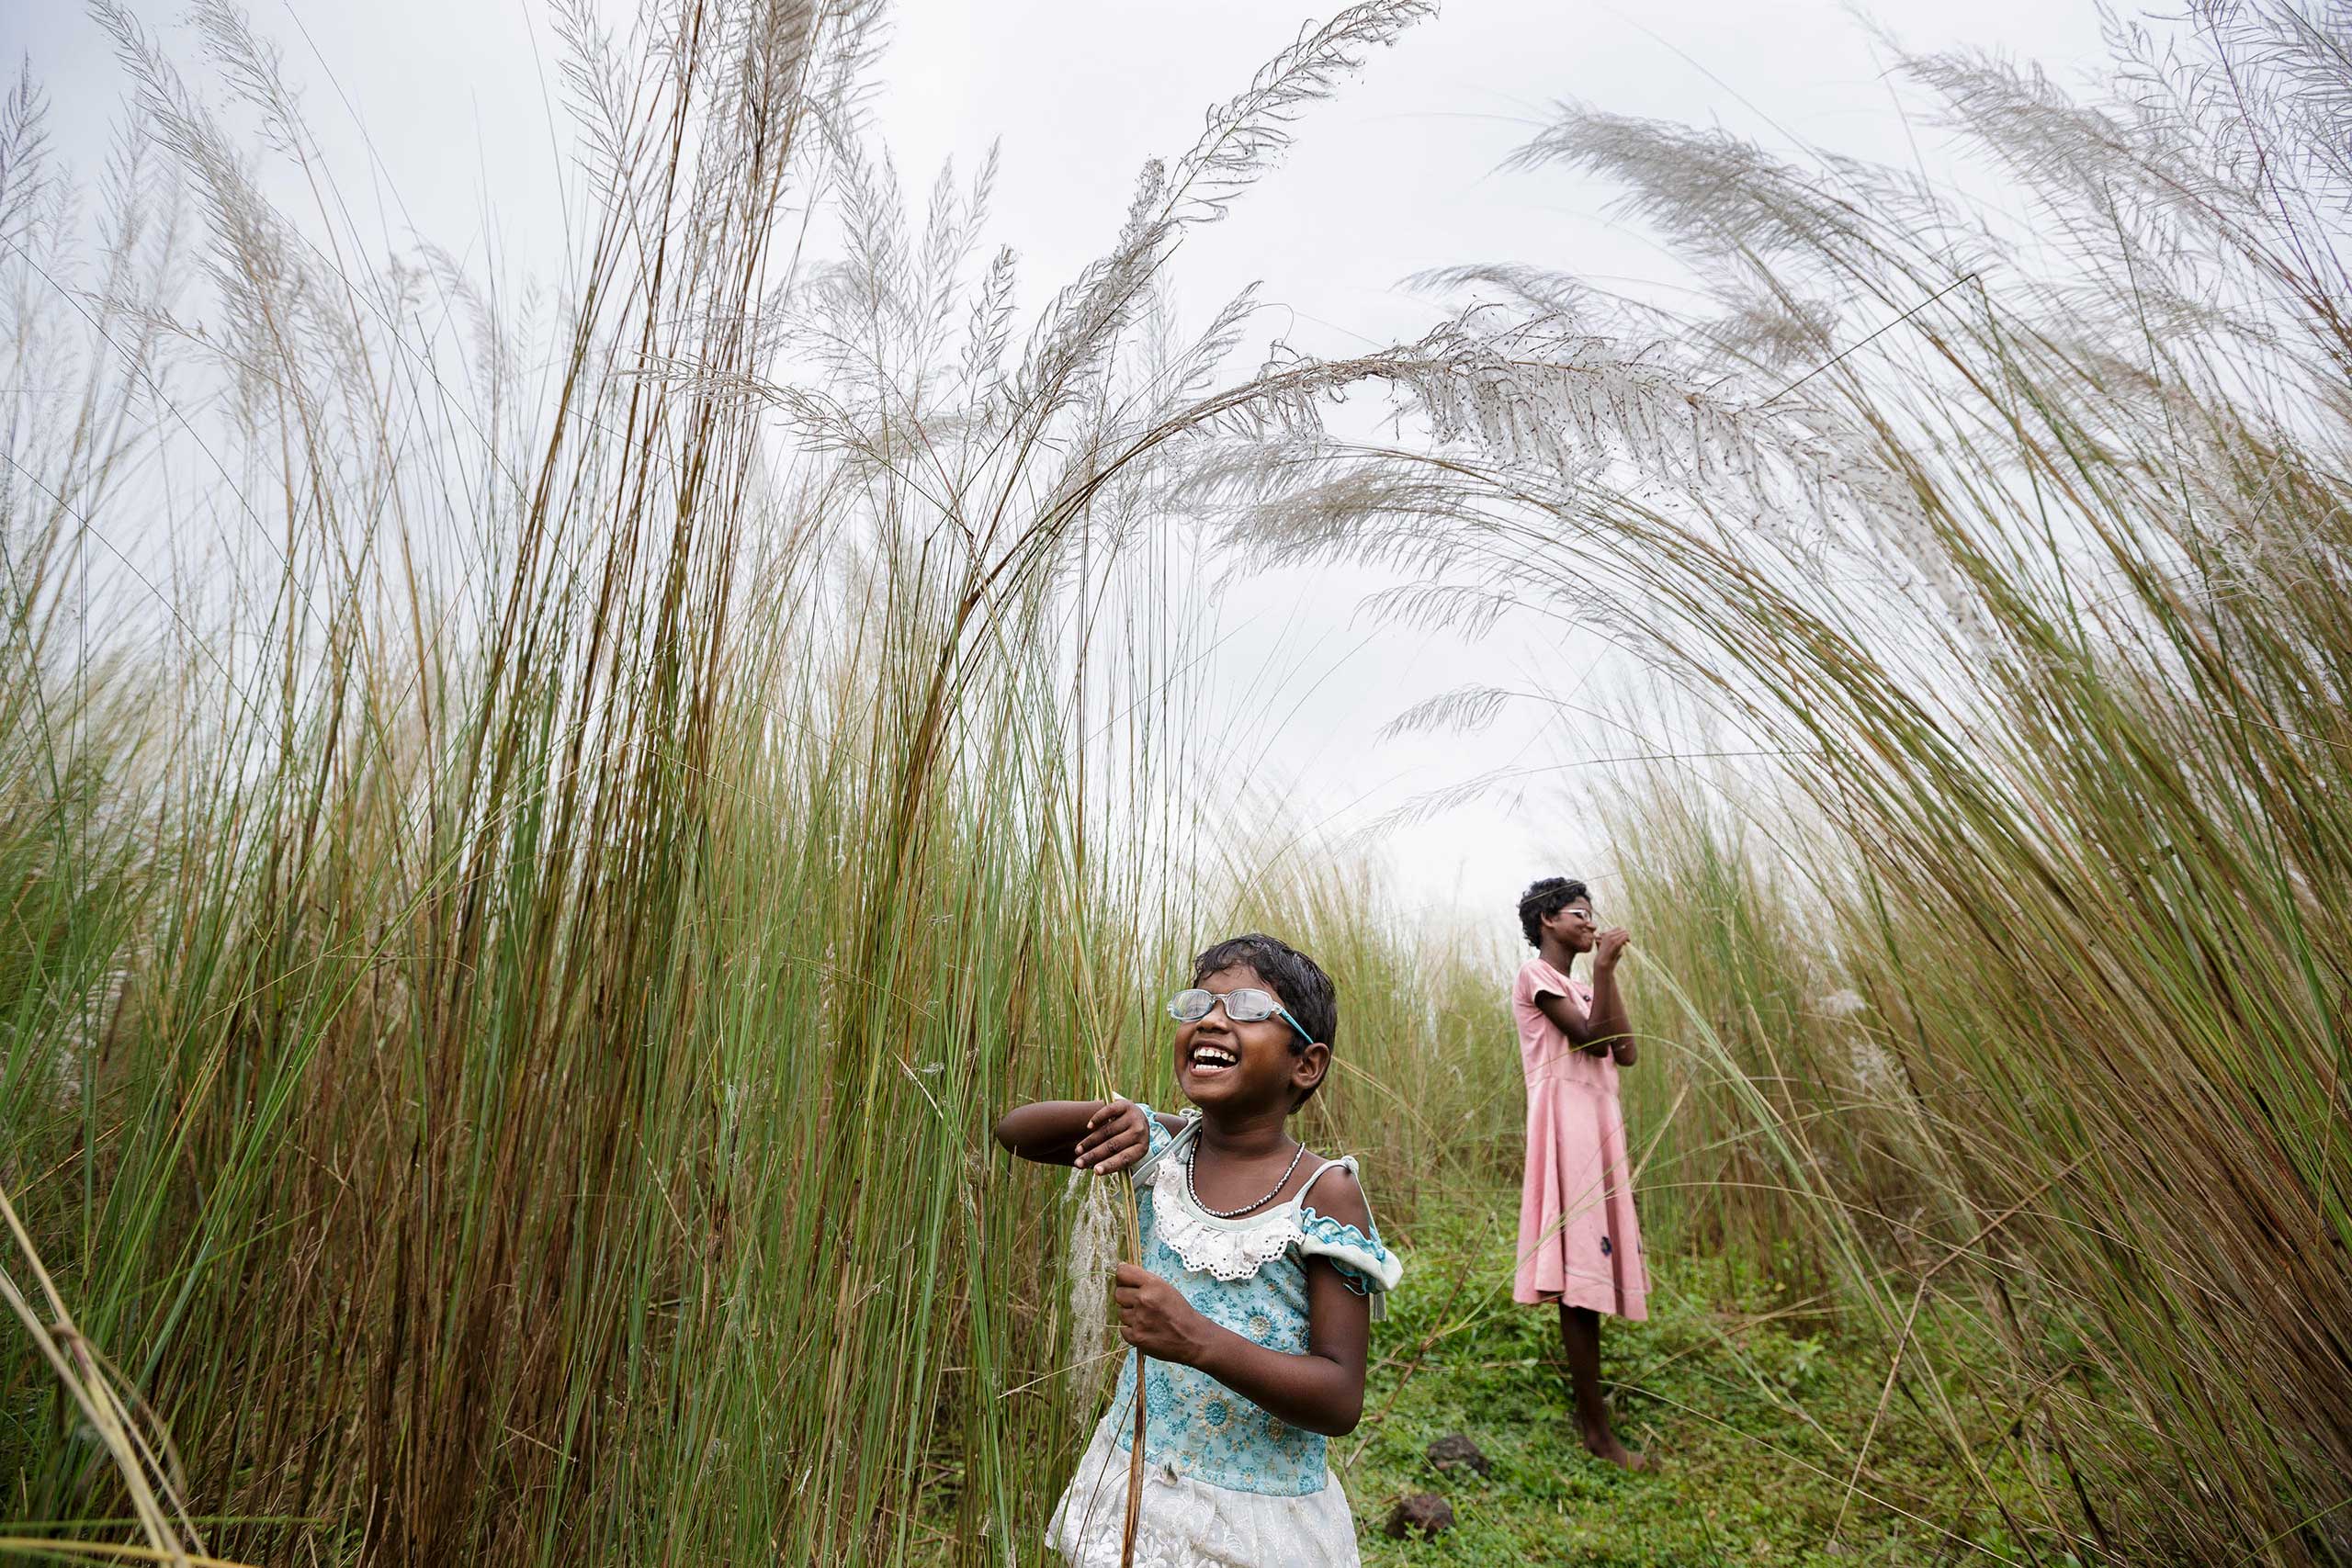 Anita and Sonia explore some of their first sensations of sight after their surgery, as they walk through bulrushes near their village, Oct. 28, 2013 in West Bengal, India. (Brent Stirton—Getty Images Reportage)